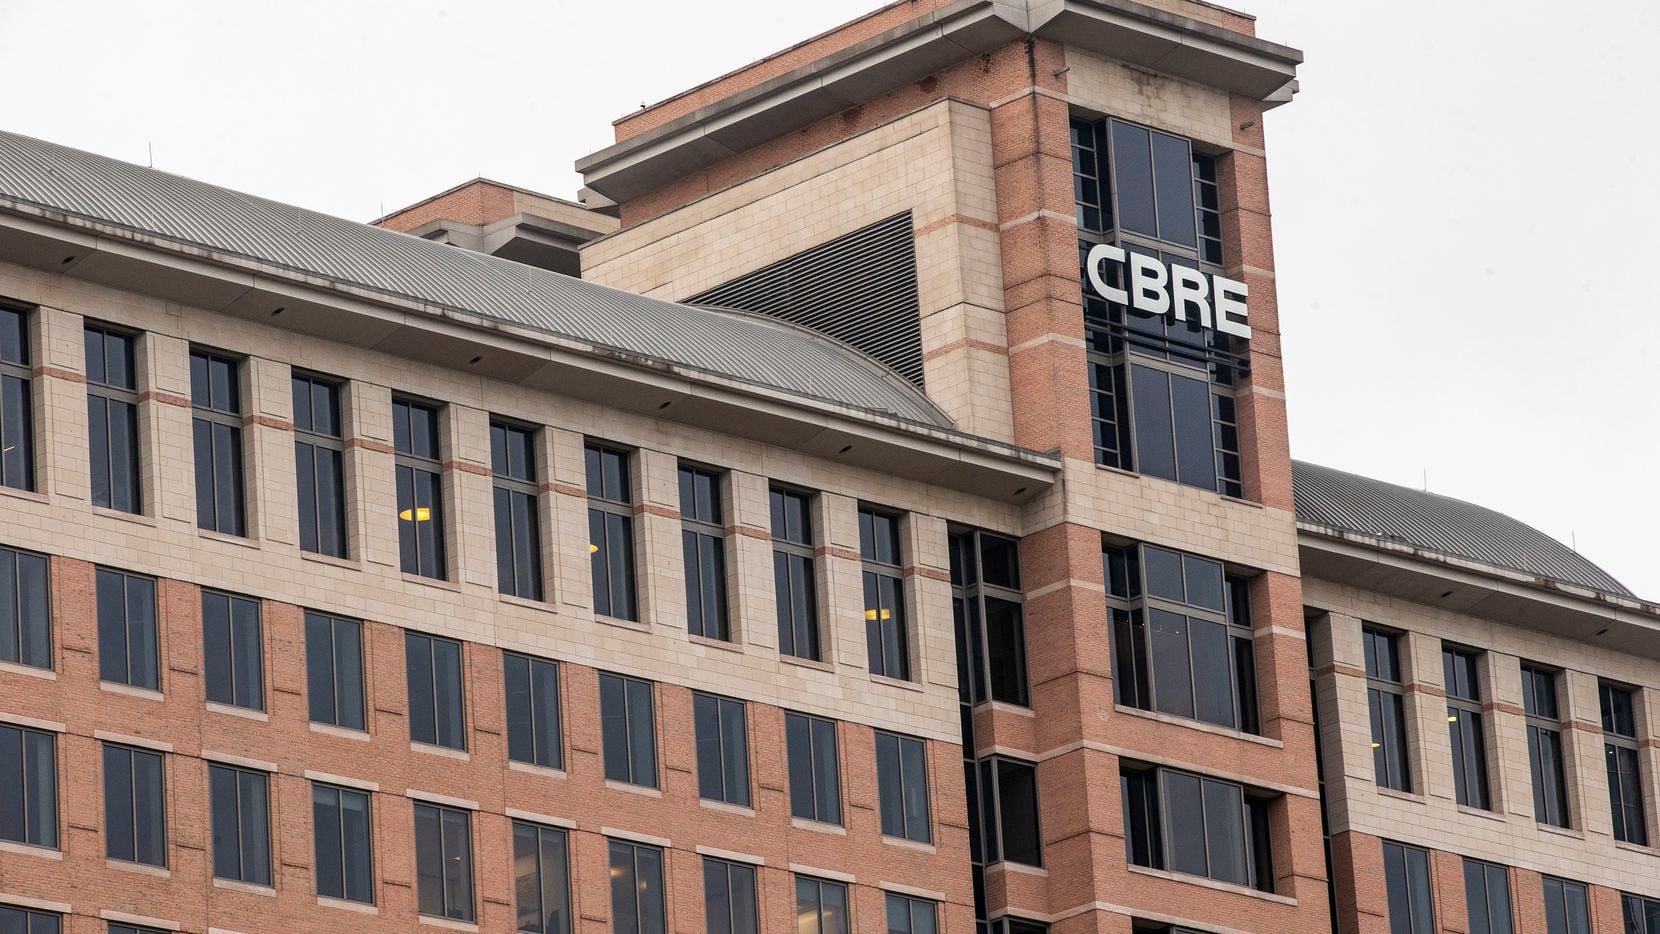 CBRE – which owns Dallas-based developer Trammell Crow Co. – had a record $11.5 billion in...